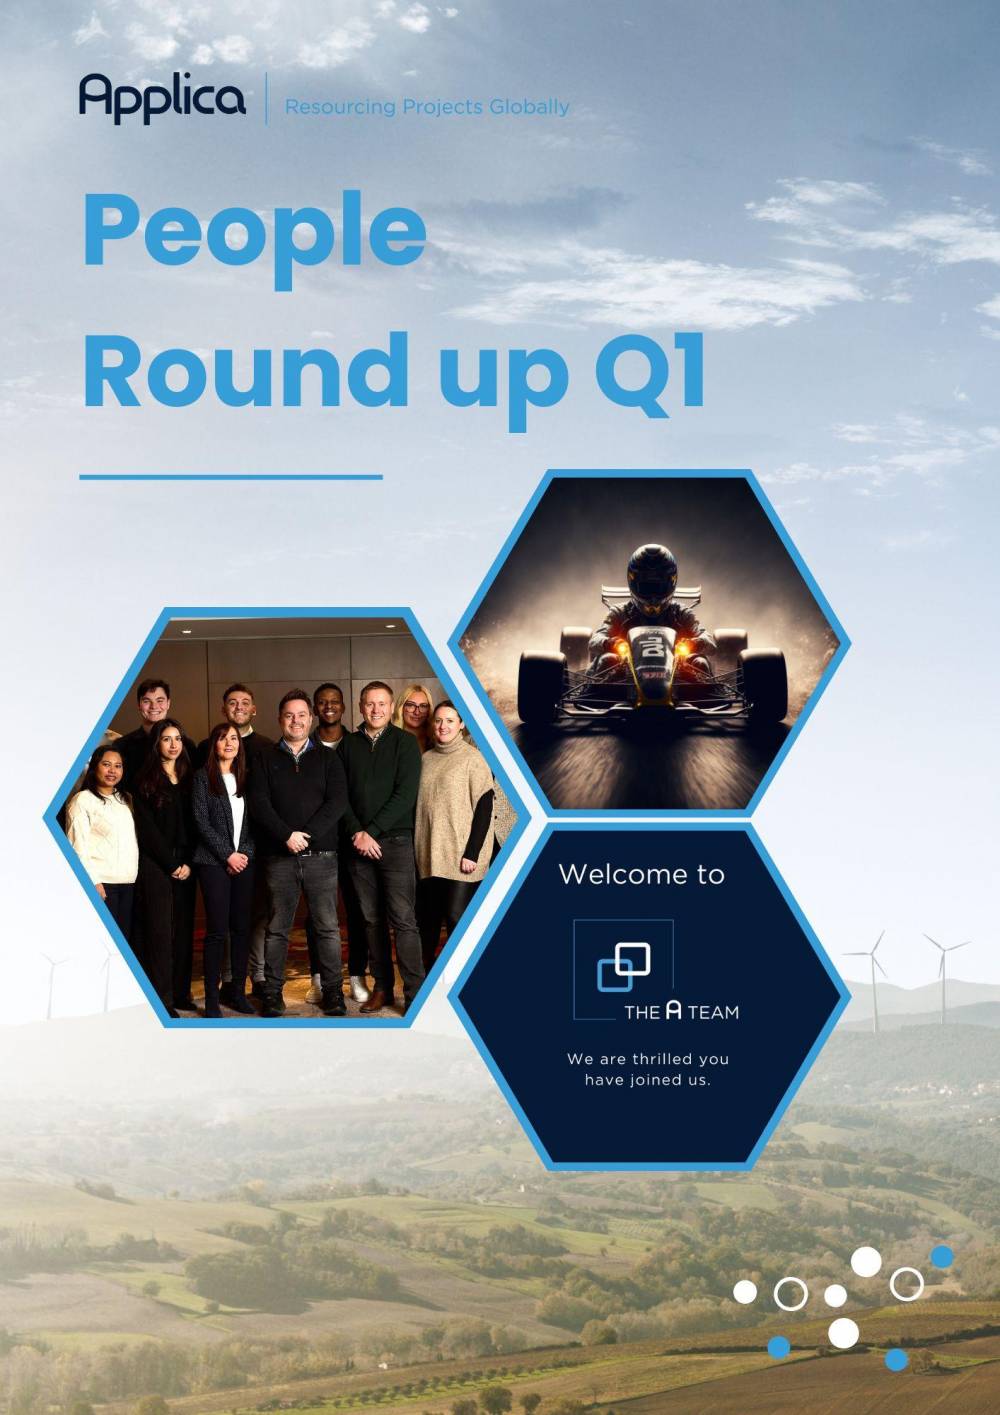 'A Team' People Round Up Q1